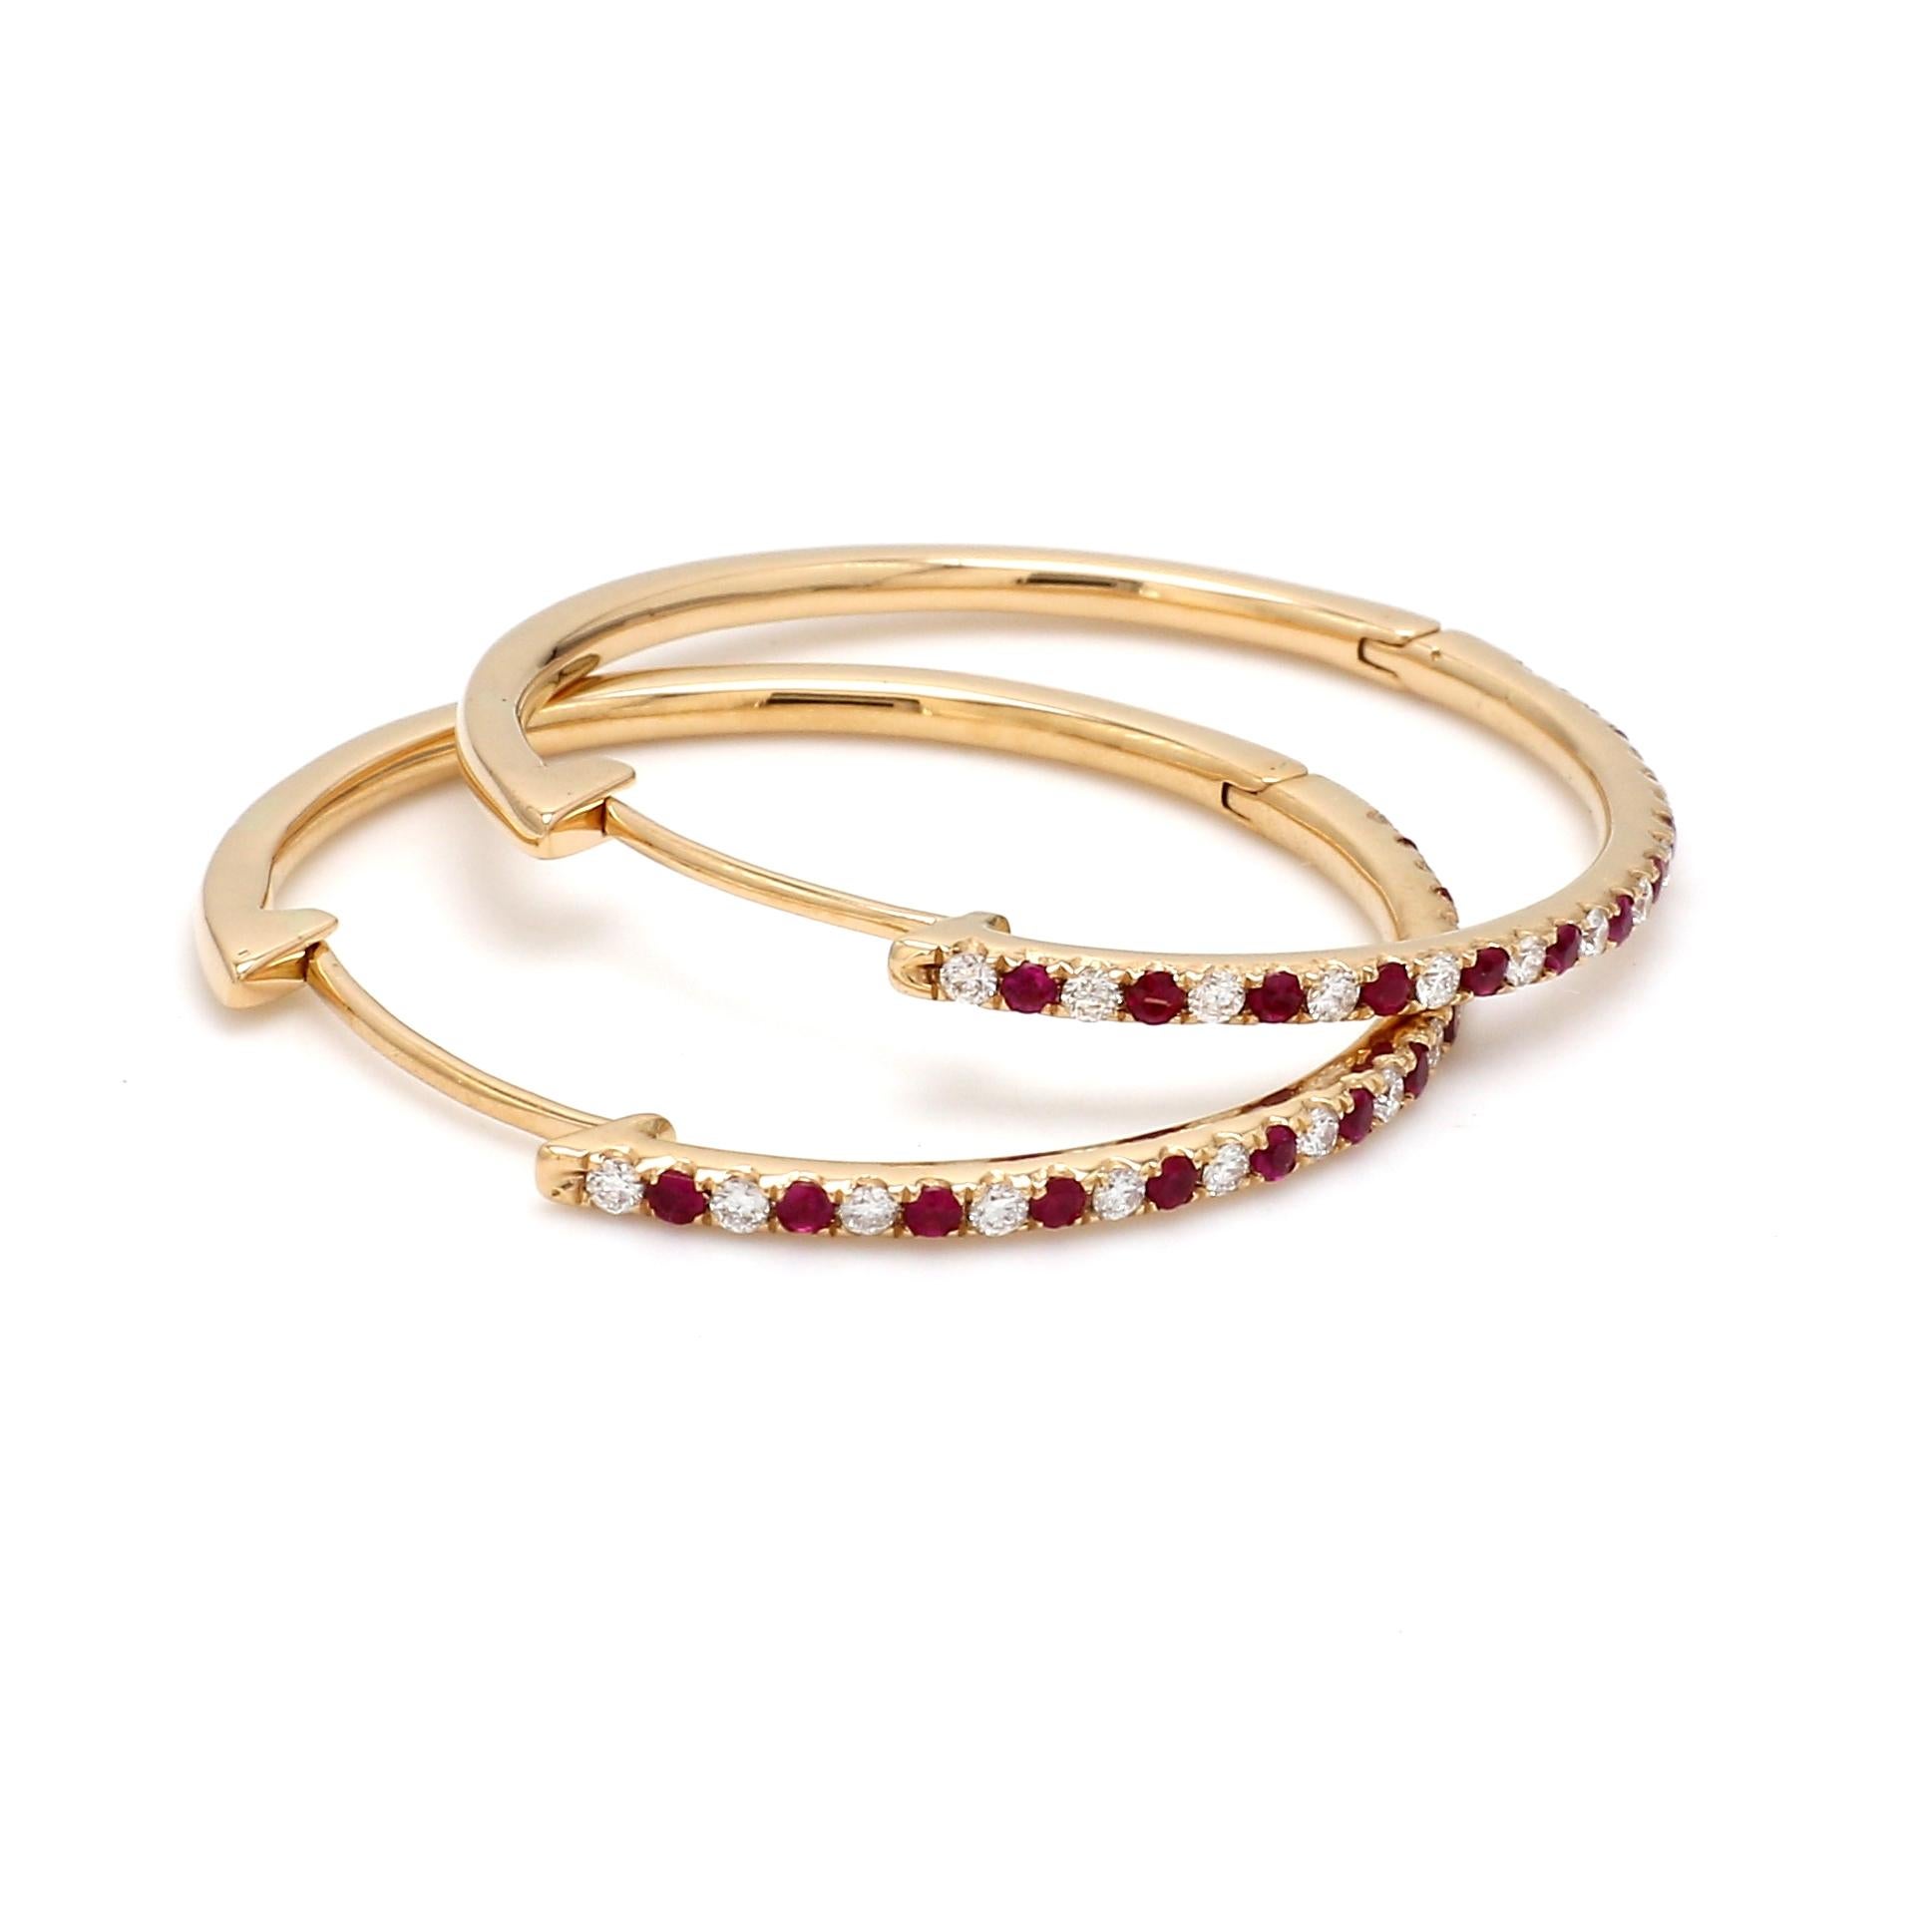 A Beautiful Handcrafted Hoop Earring in 18 karat Yellow Gold with Natural Brilliant Cut Colorless Diamond And  Vibrant Rubies. A Statement piece for Evening Wear

Natural Diamond Details
Pieces : 26 Pieces
Weight : 0.28 Carat 
Clarity of Diamond :